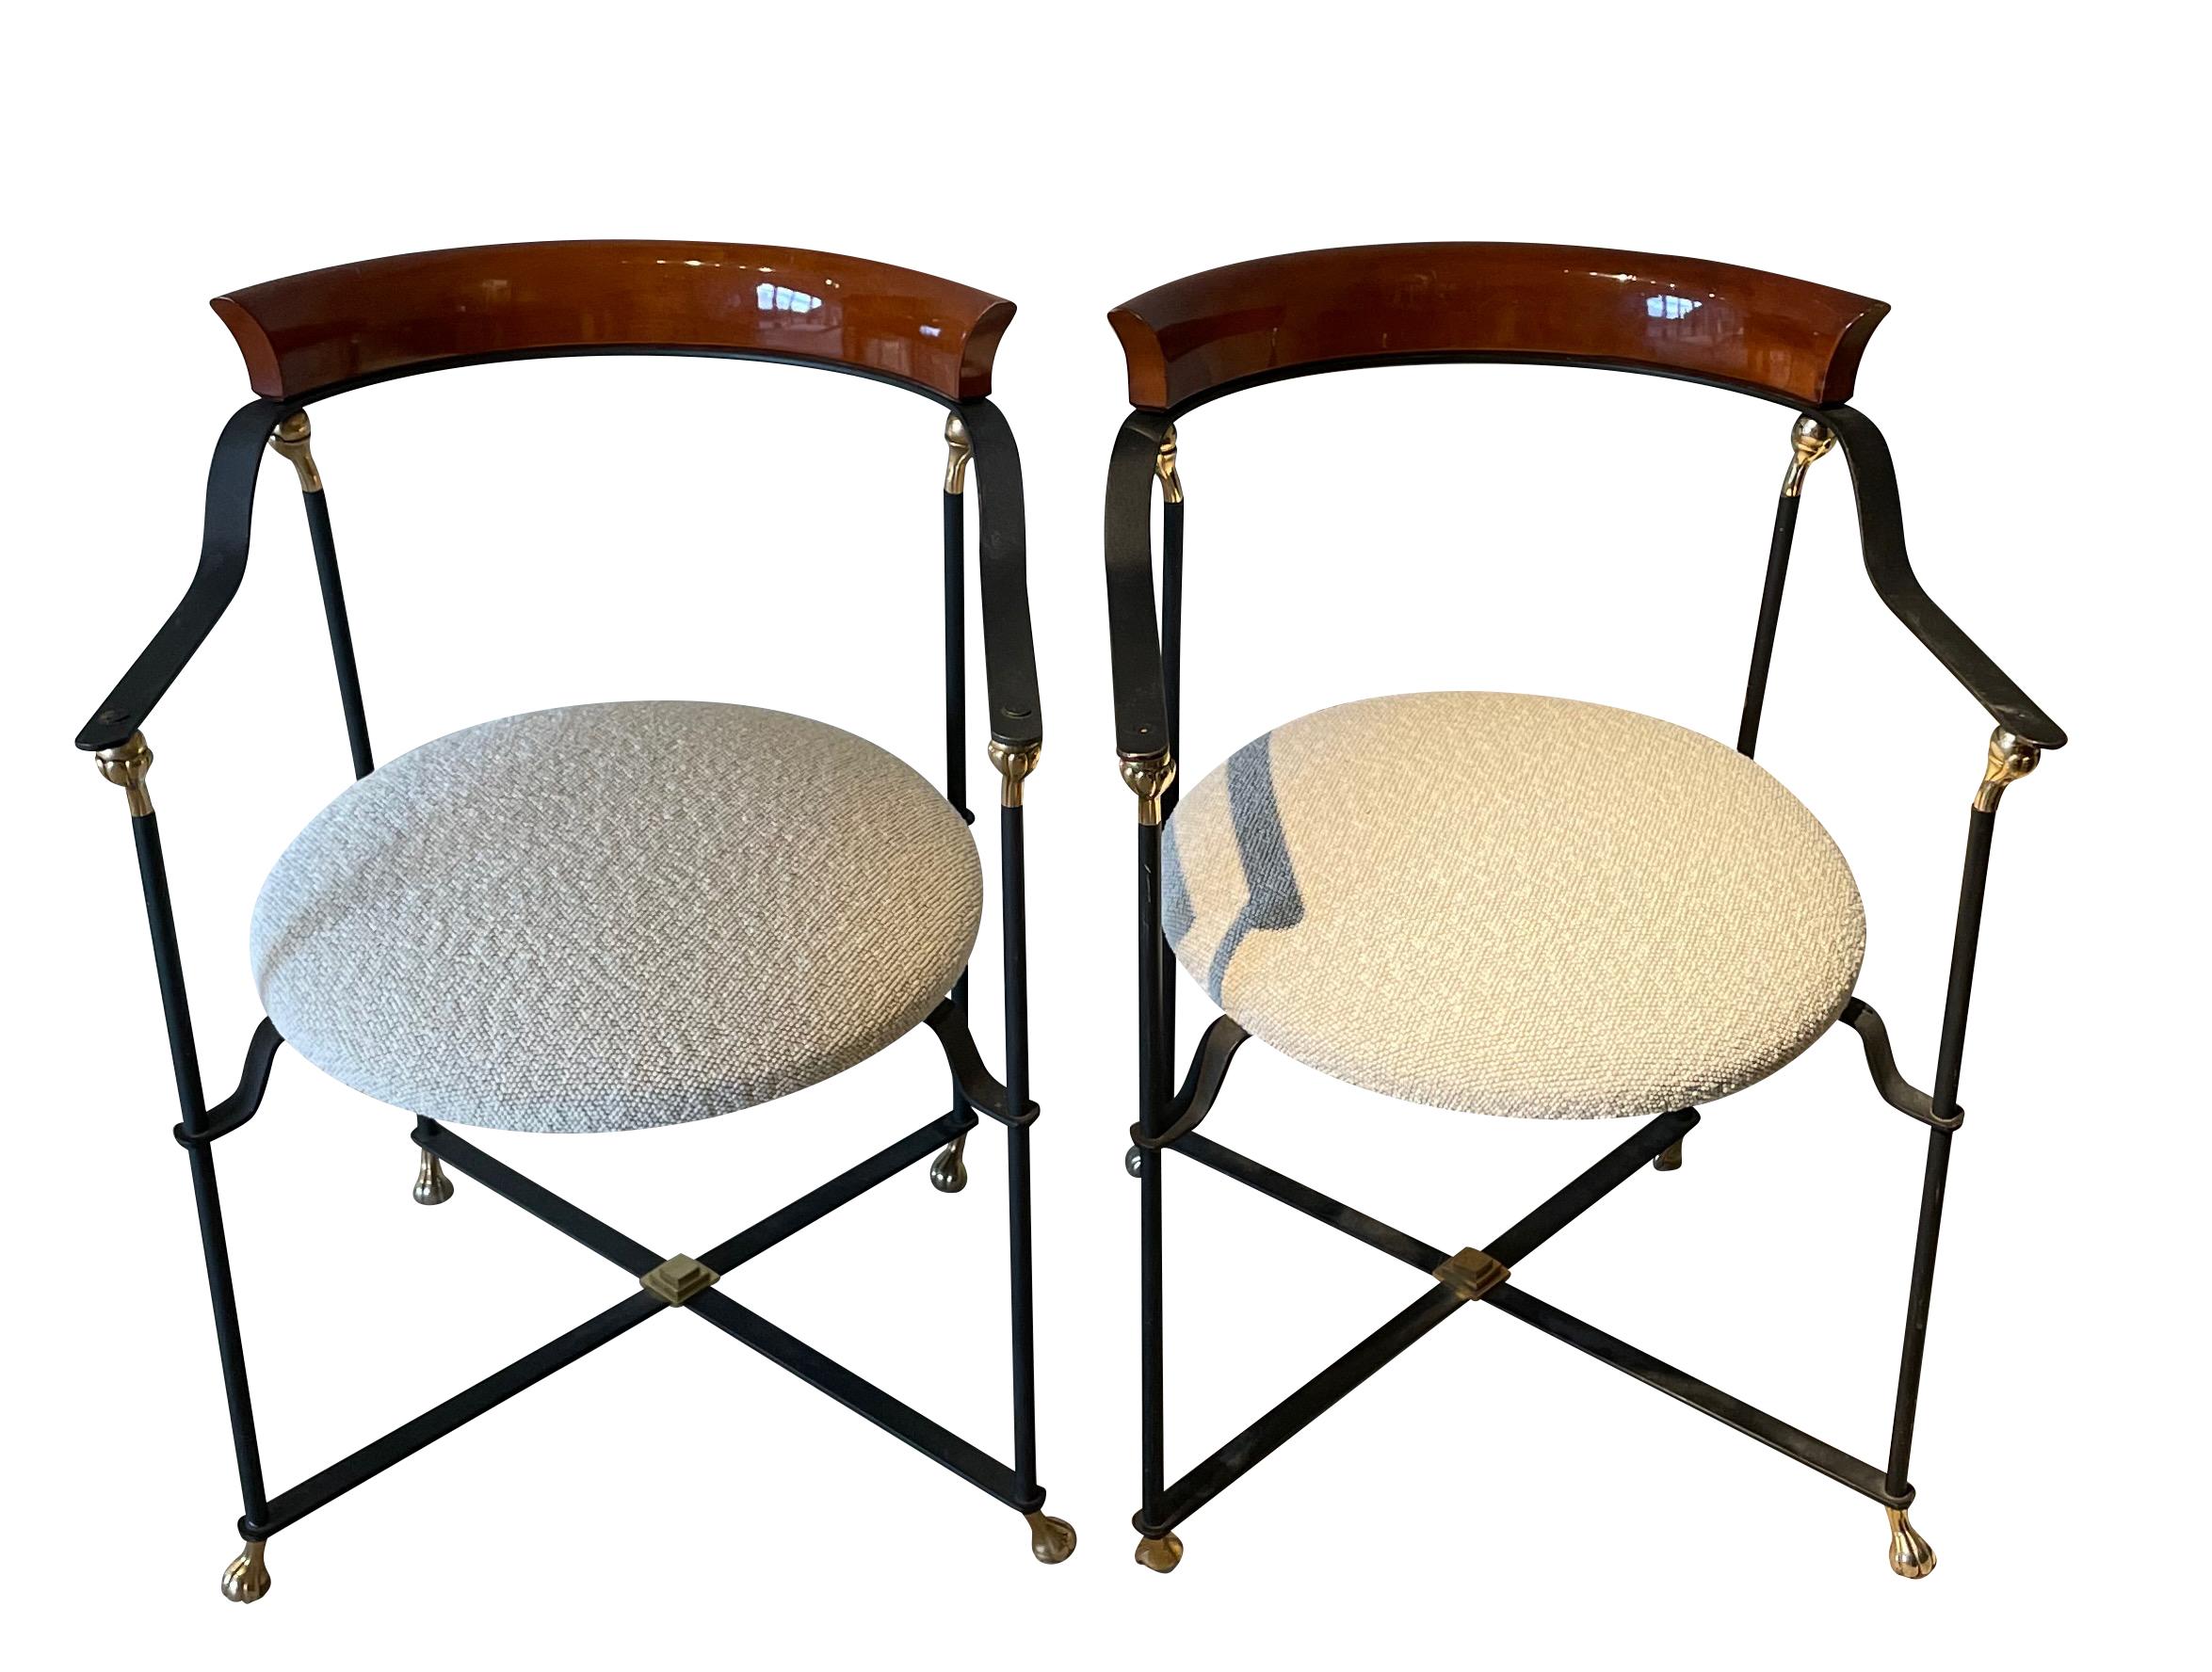 1970's French pair black metal framed chairs with curved polished palissndre back support.
Decorative brass accents.
X base stretcher.
Seat recently reupholstered in boucle fabric.
Can be used as dining or pull up chairs.
ARRIVING AUGUST
